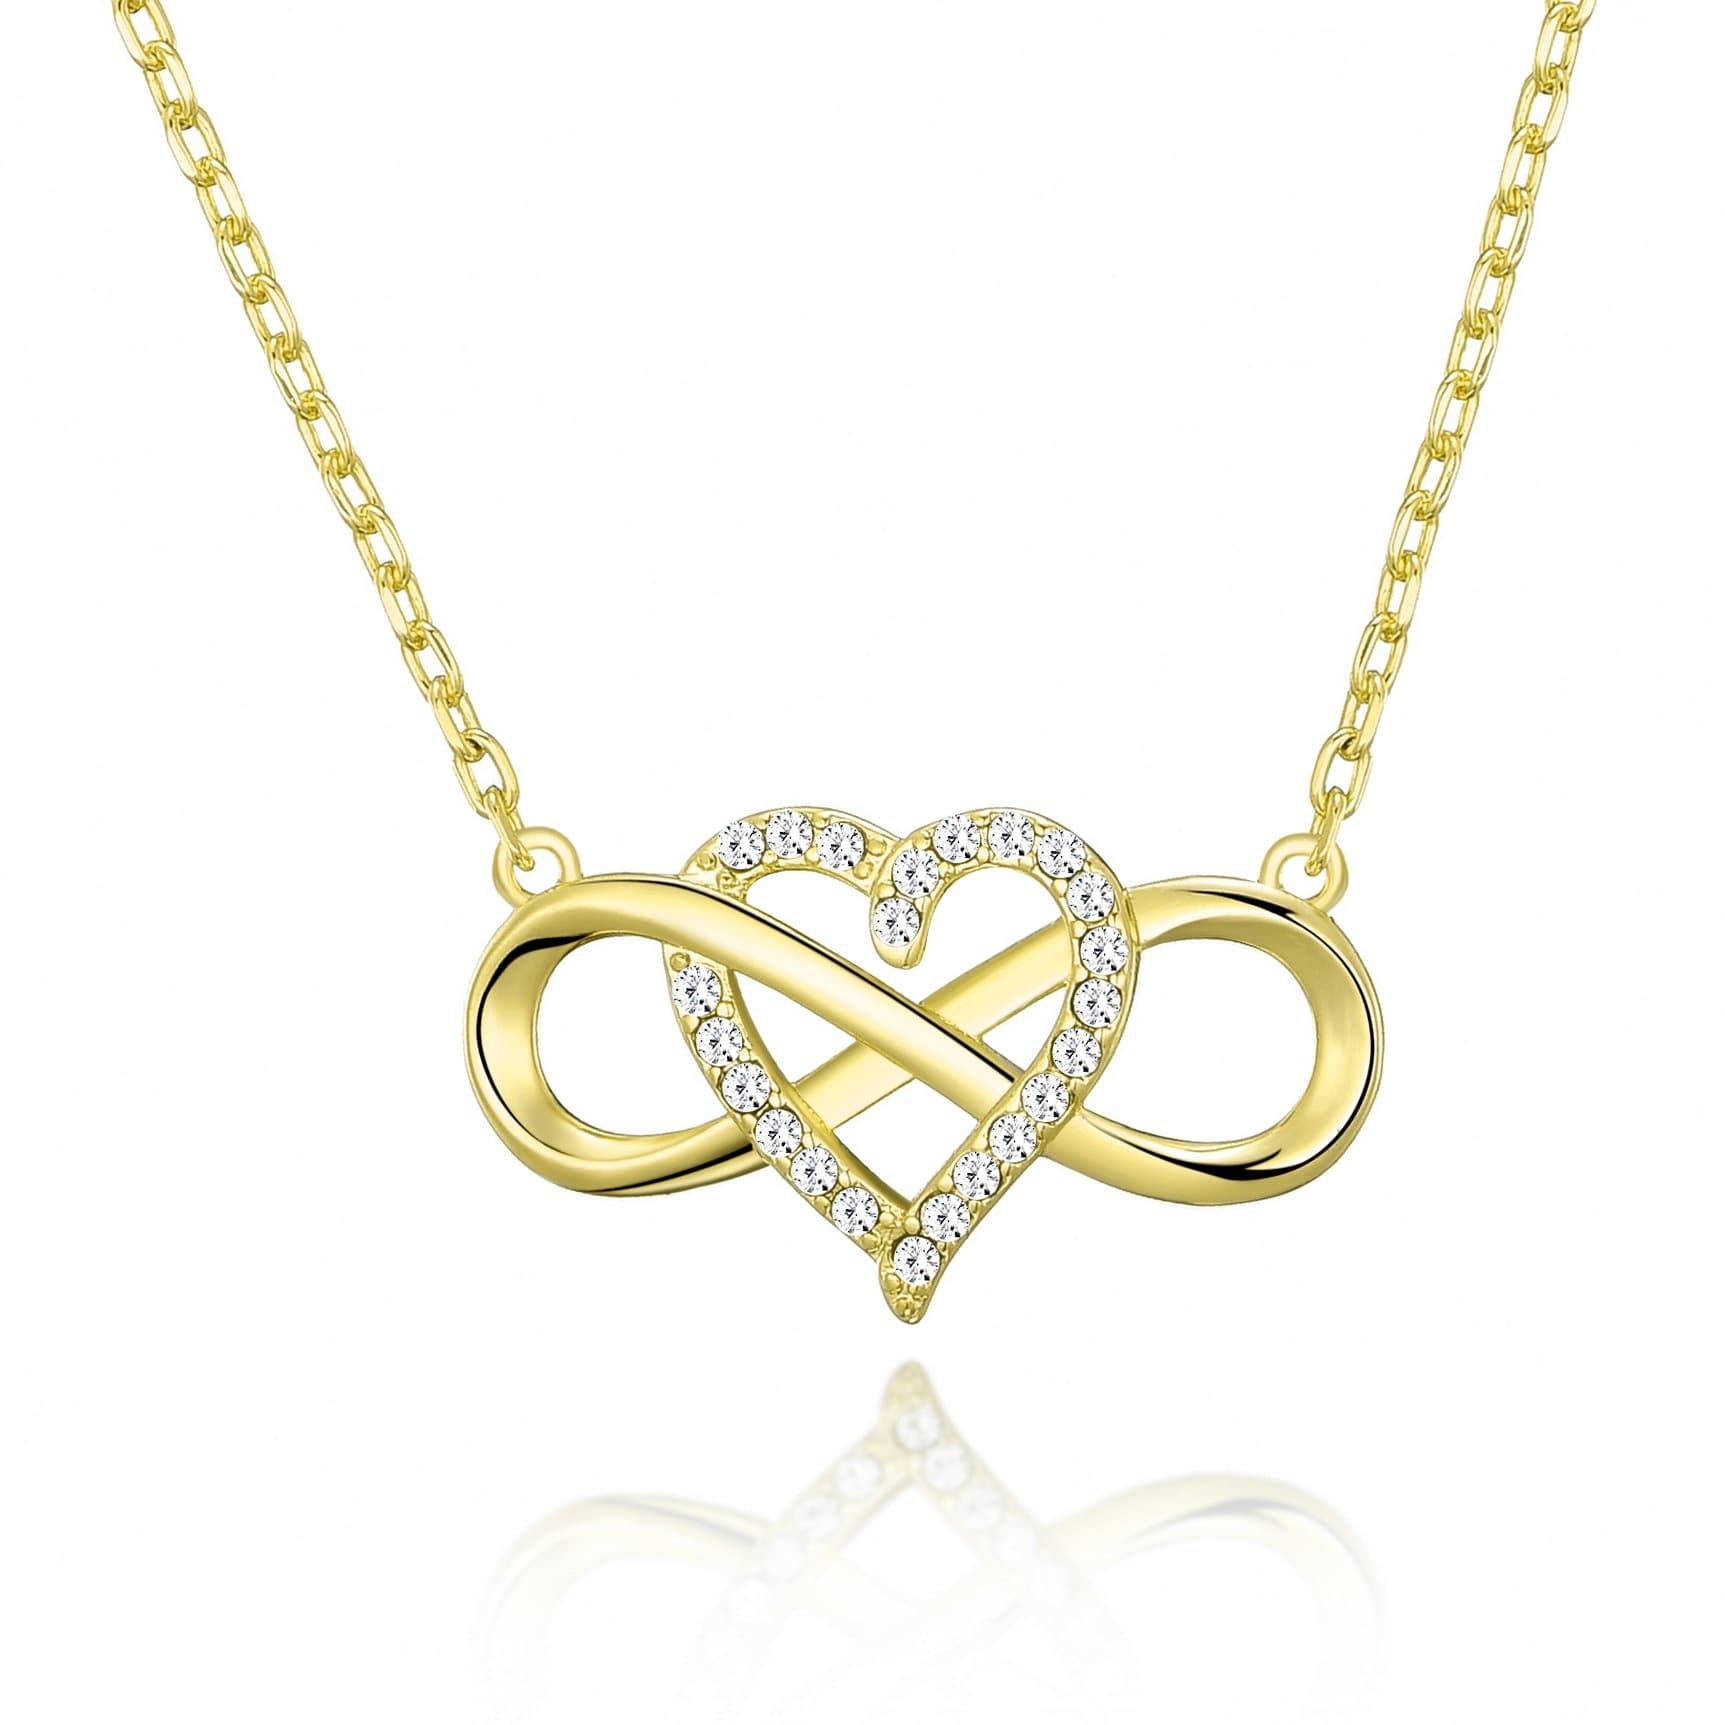 Gold Plated Infinity Heart Necklace Created with Zircondia® Crystals